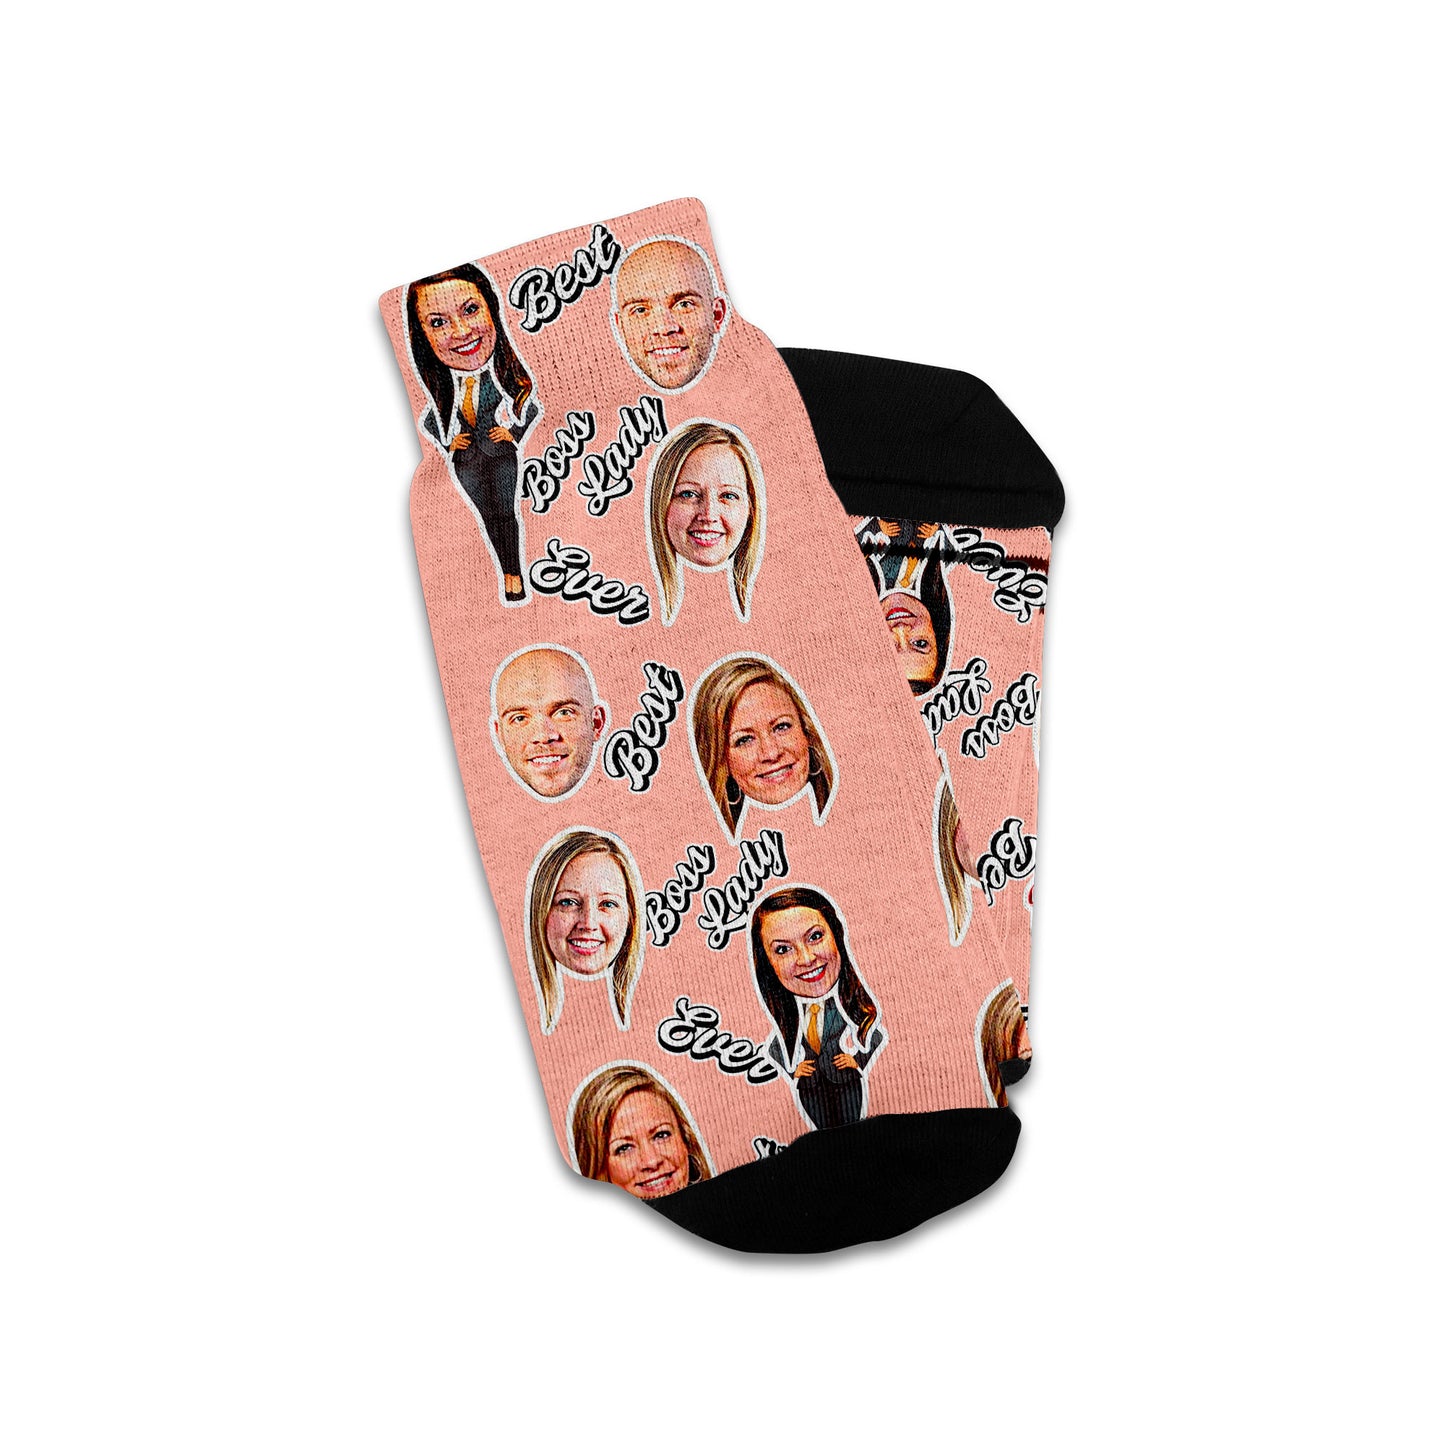 woman boss day gift personalized socks with faces